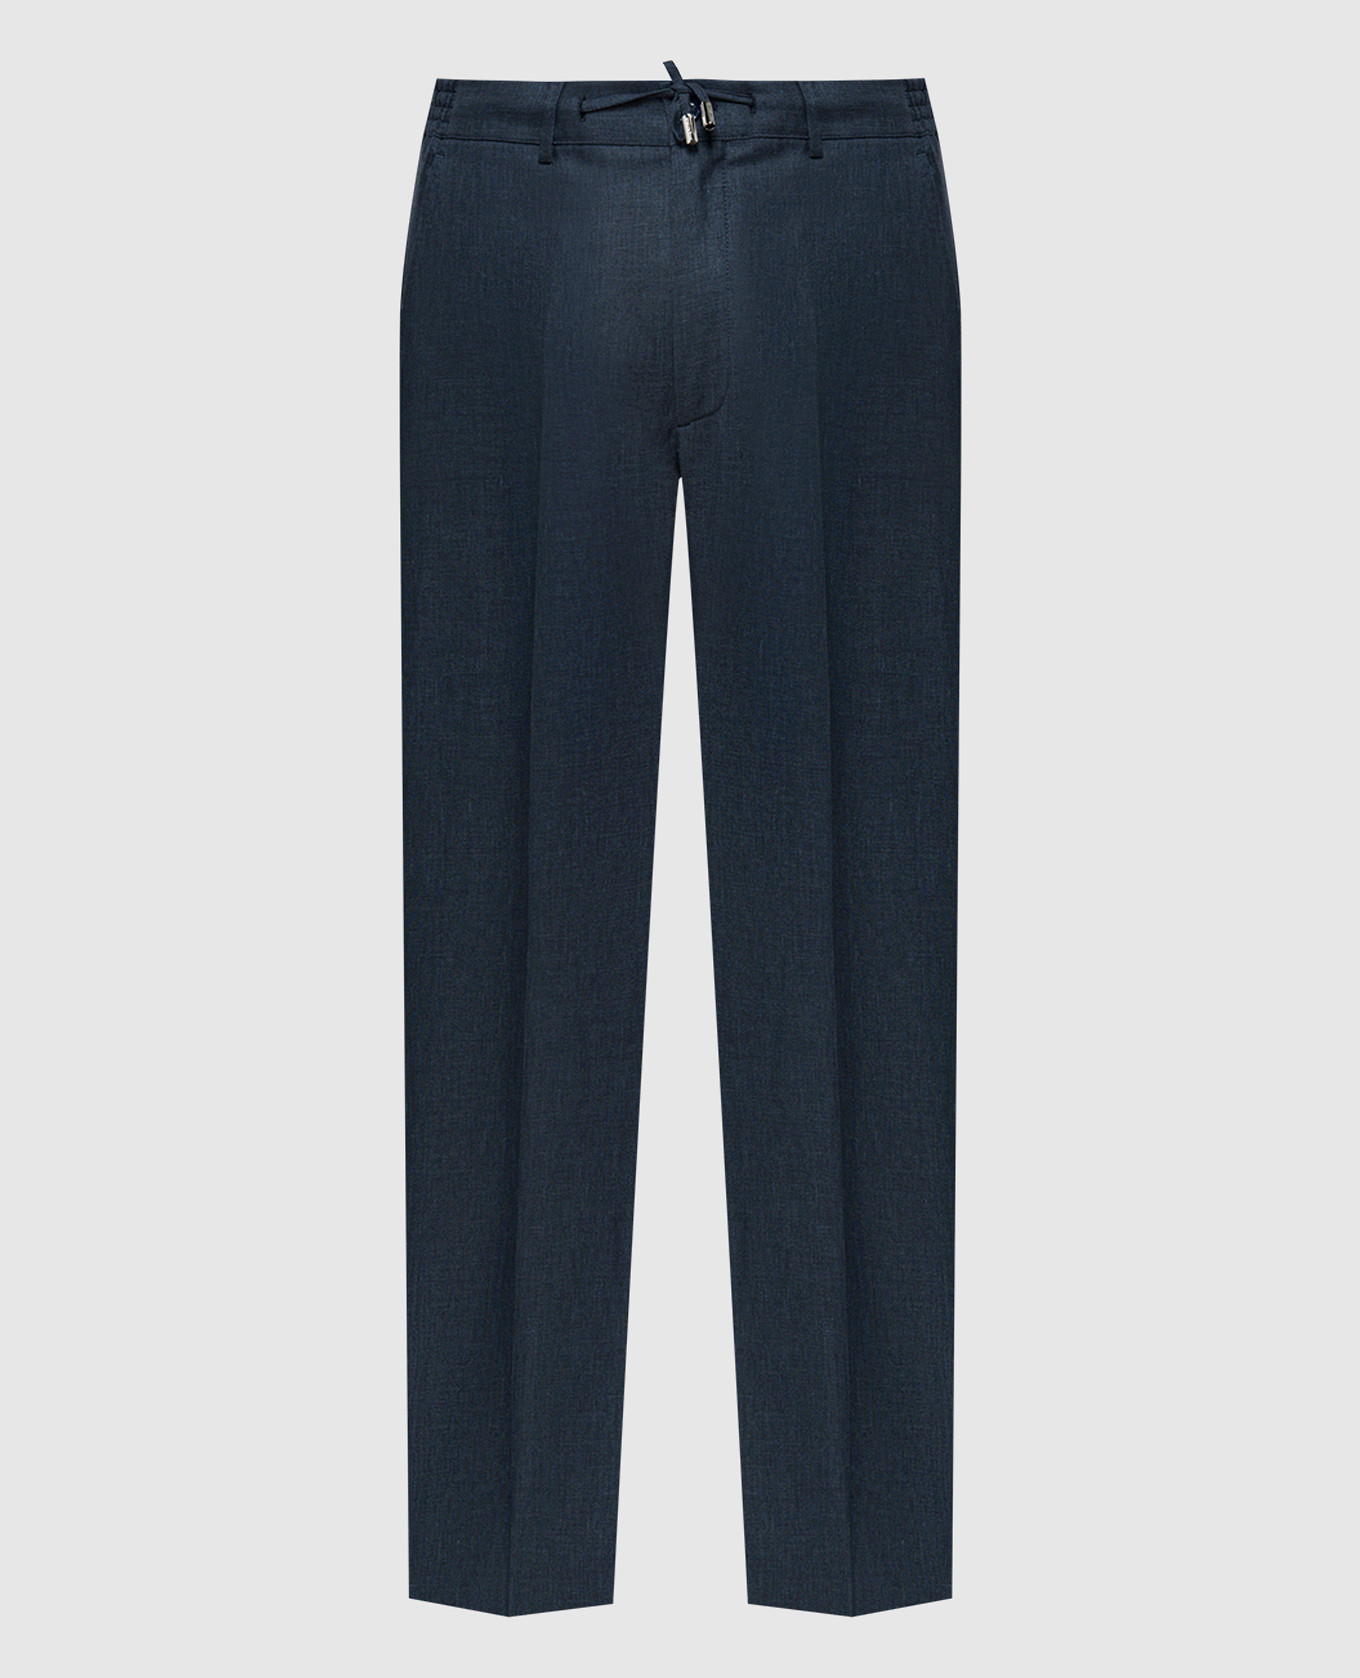 Blue trousers in linen, wool and silk with a metallic logo